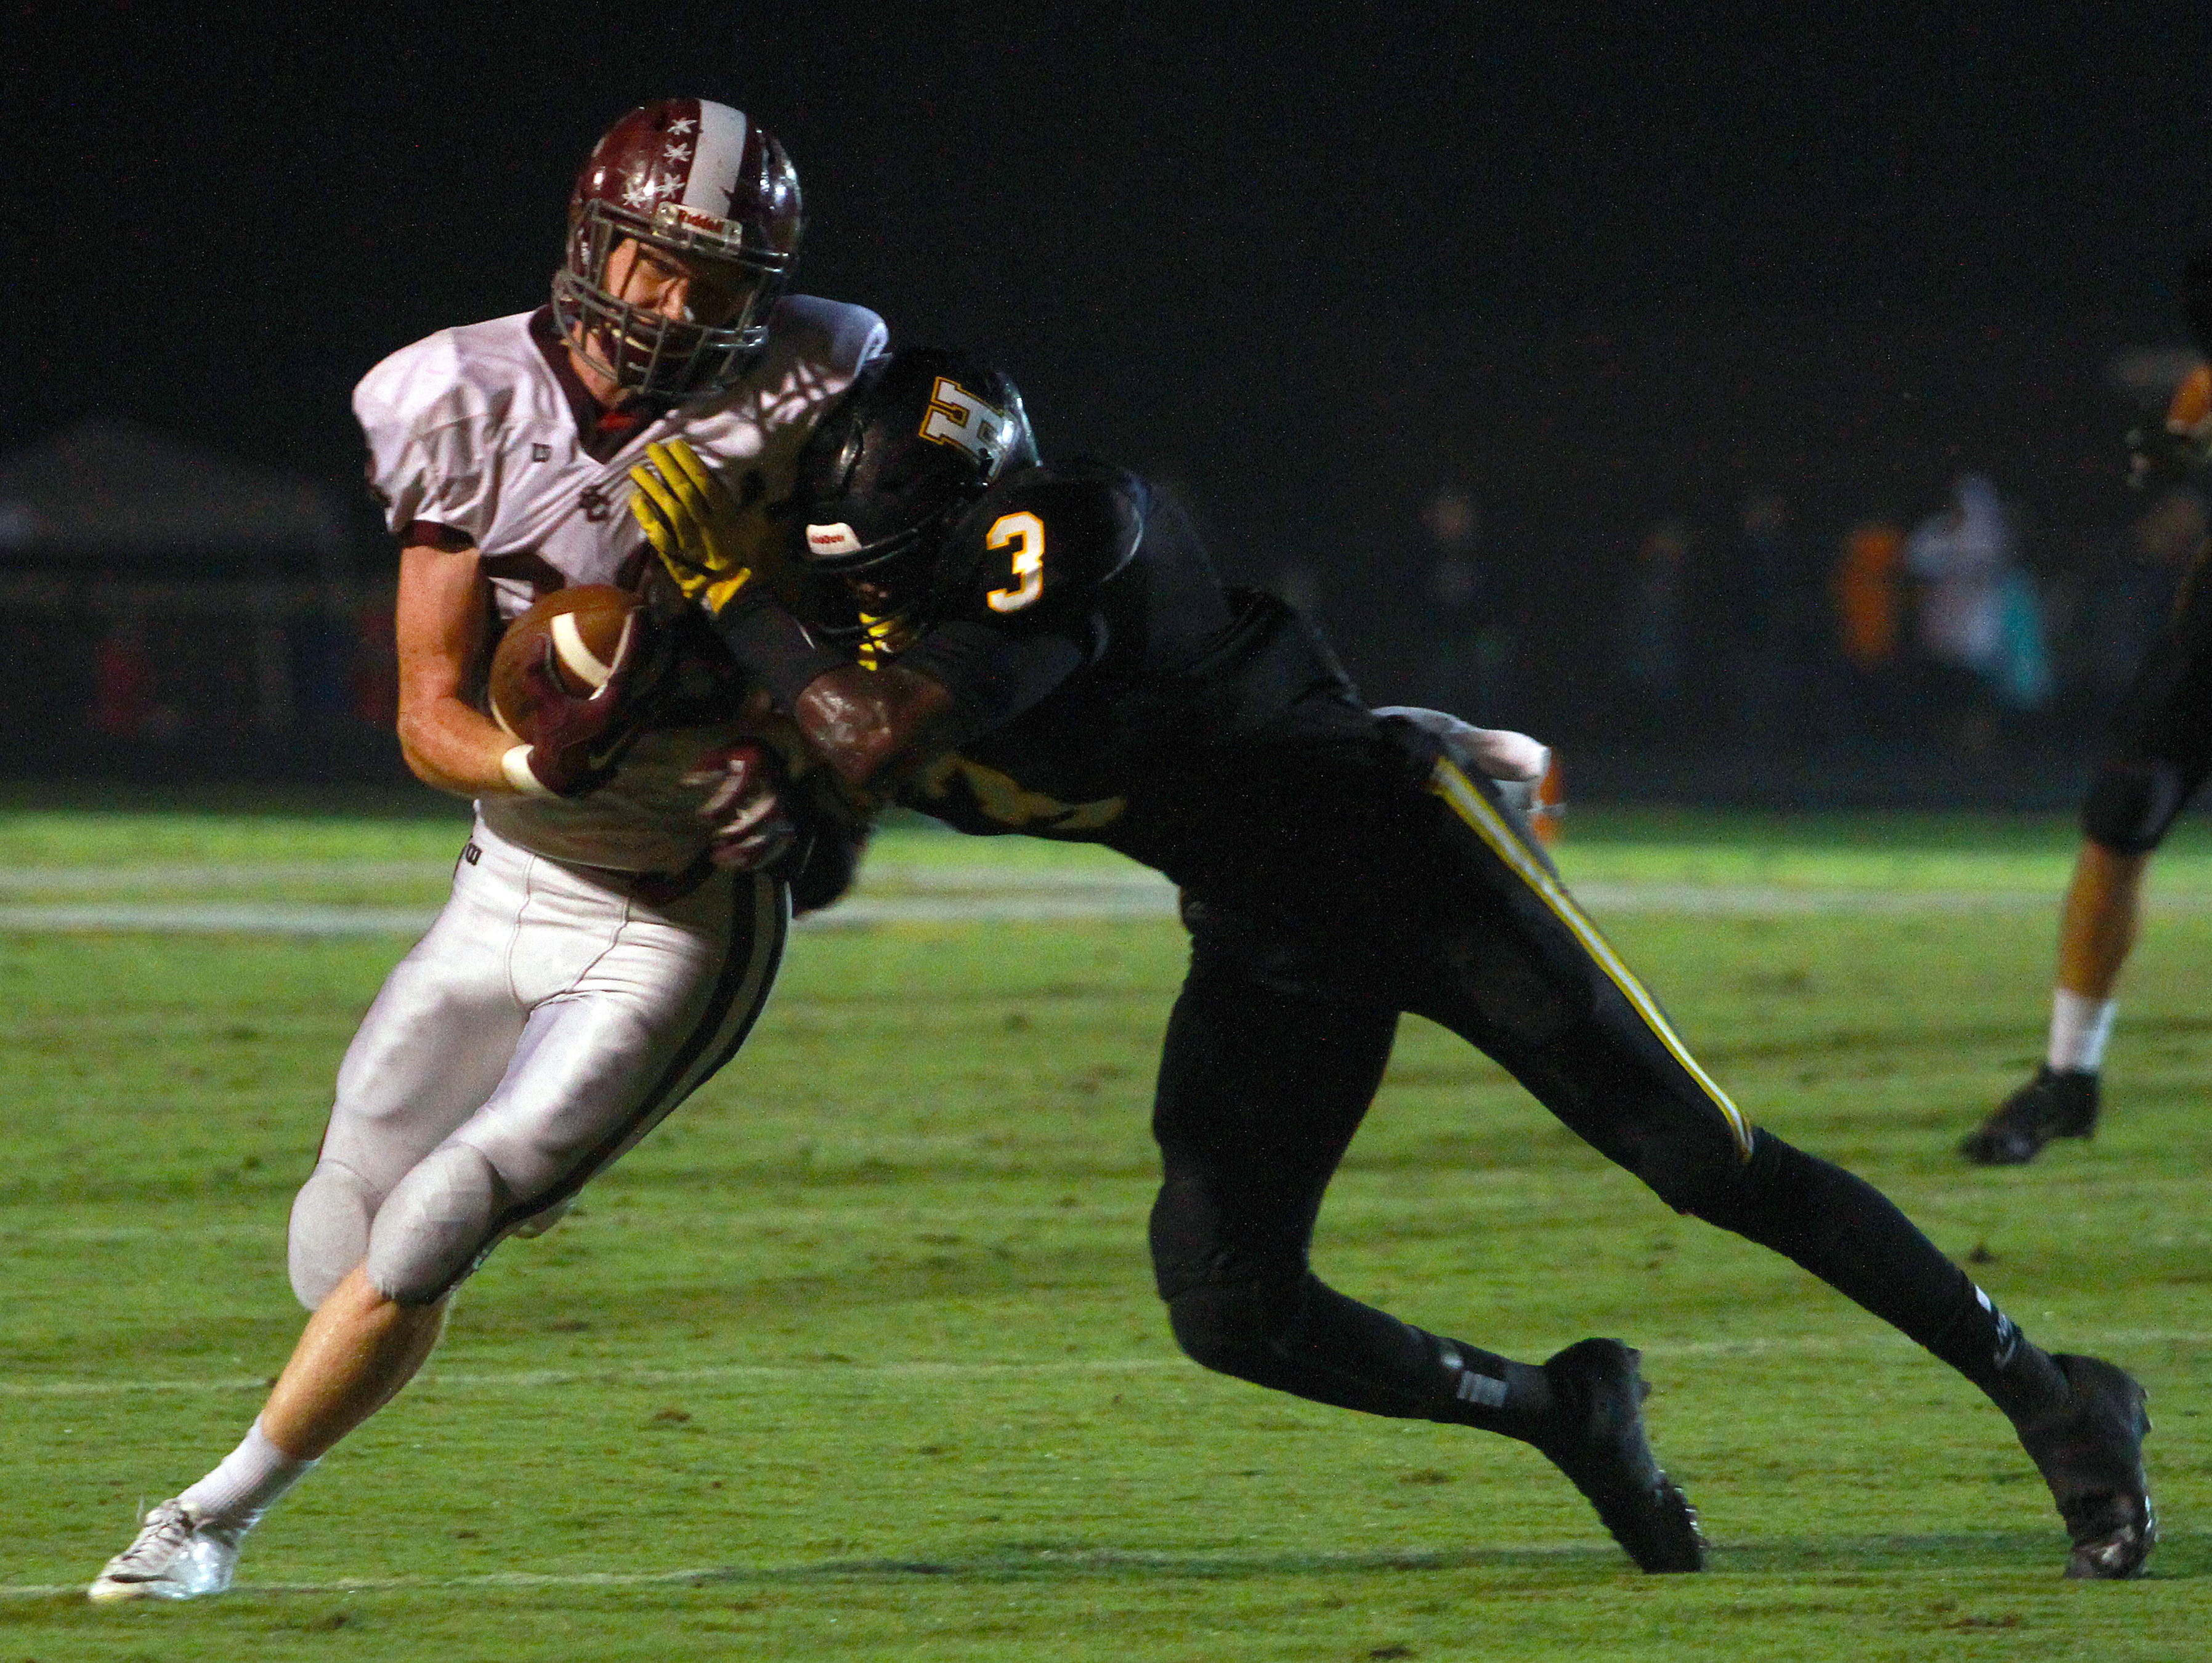 Station Camp's Tyler White makes the reception as Hendersonville's Josh Grieve makes the tackle during Friday's game.